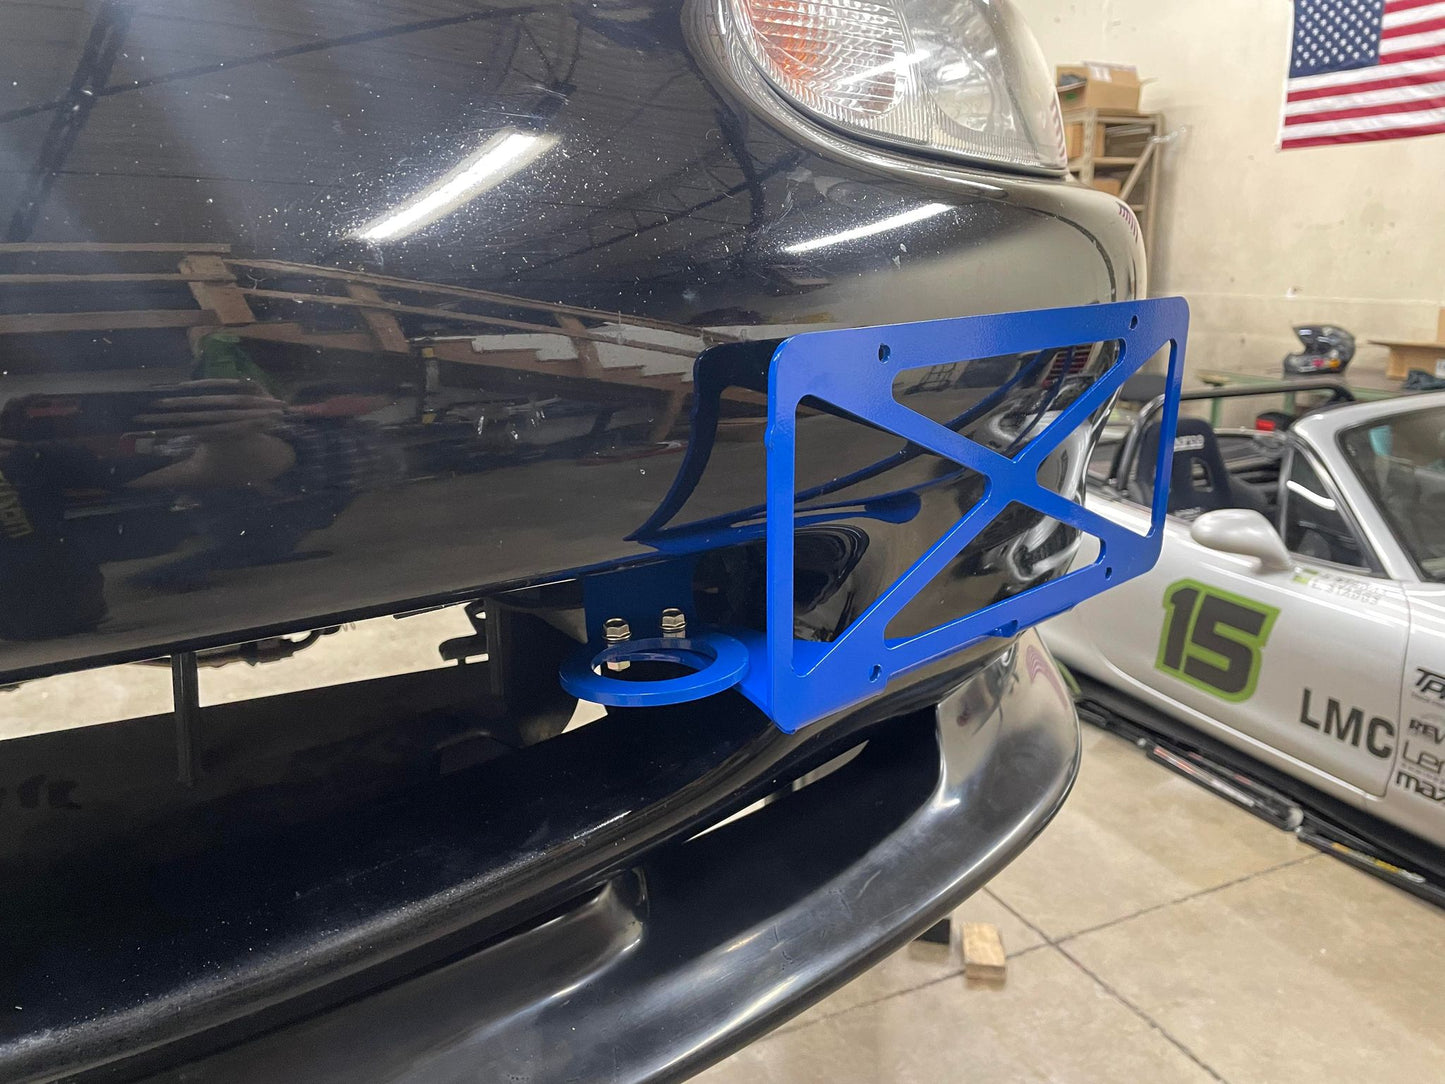 NA/NB Miata Front Tow Hook and License Plate Mount